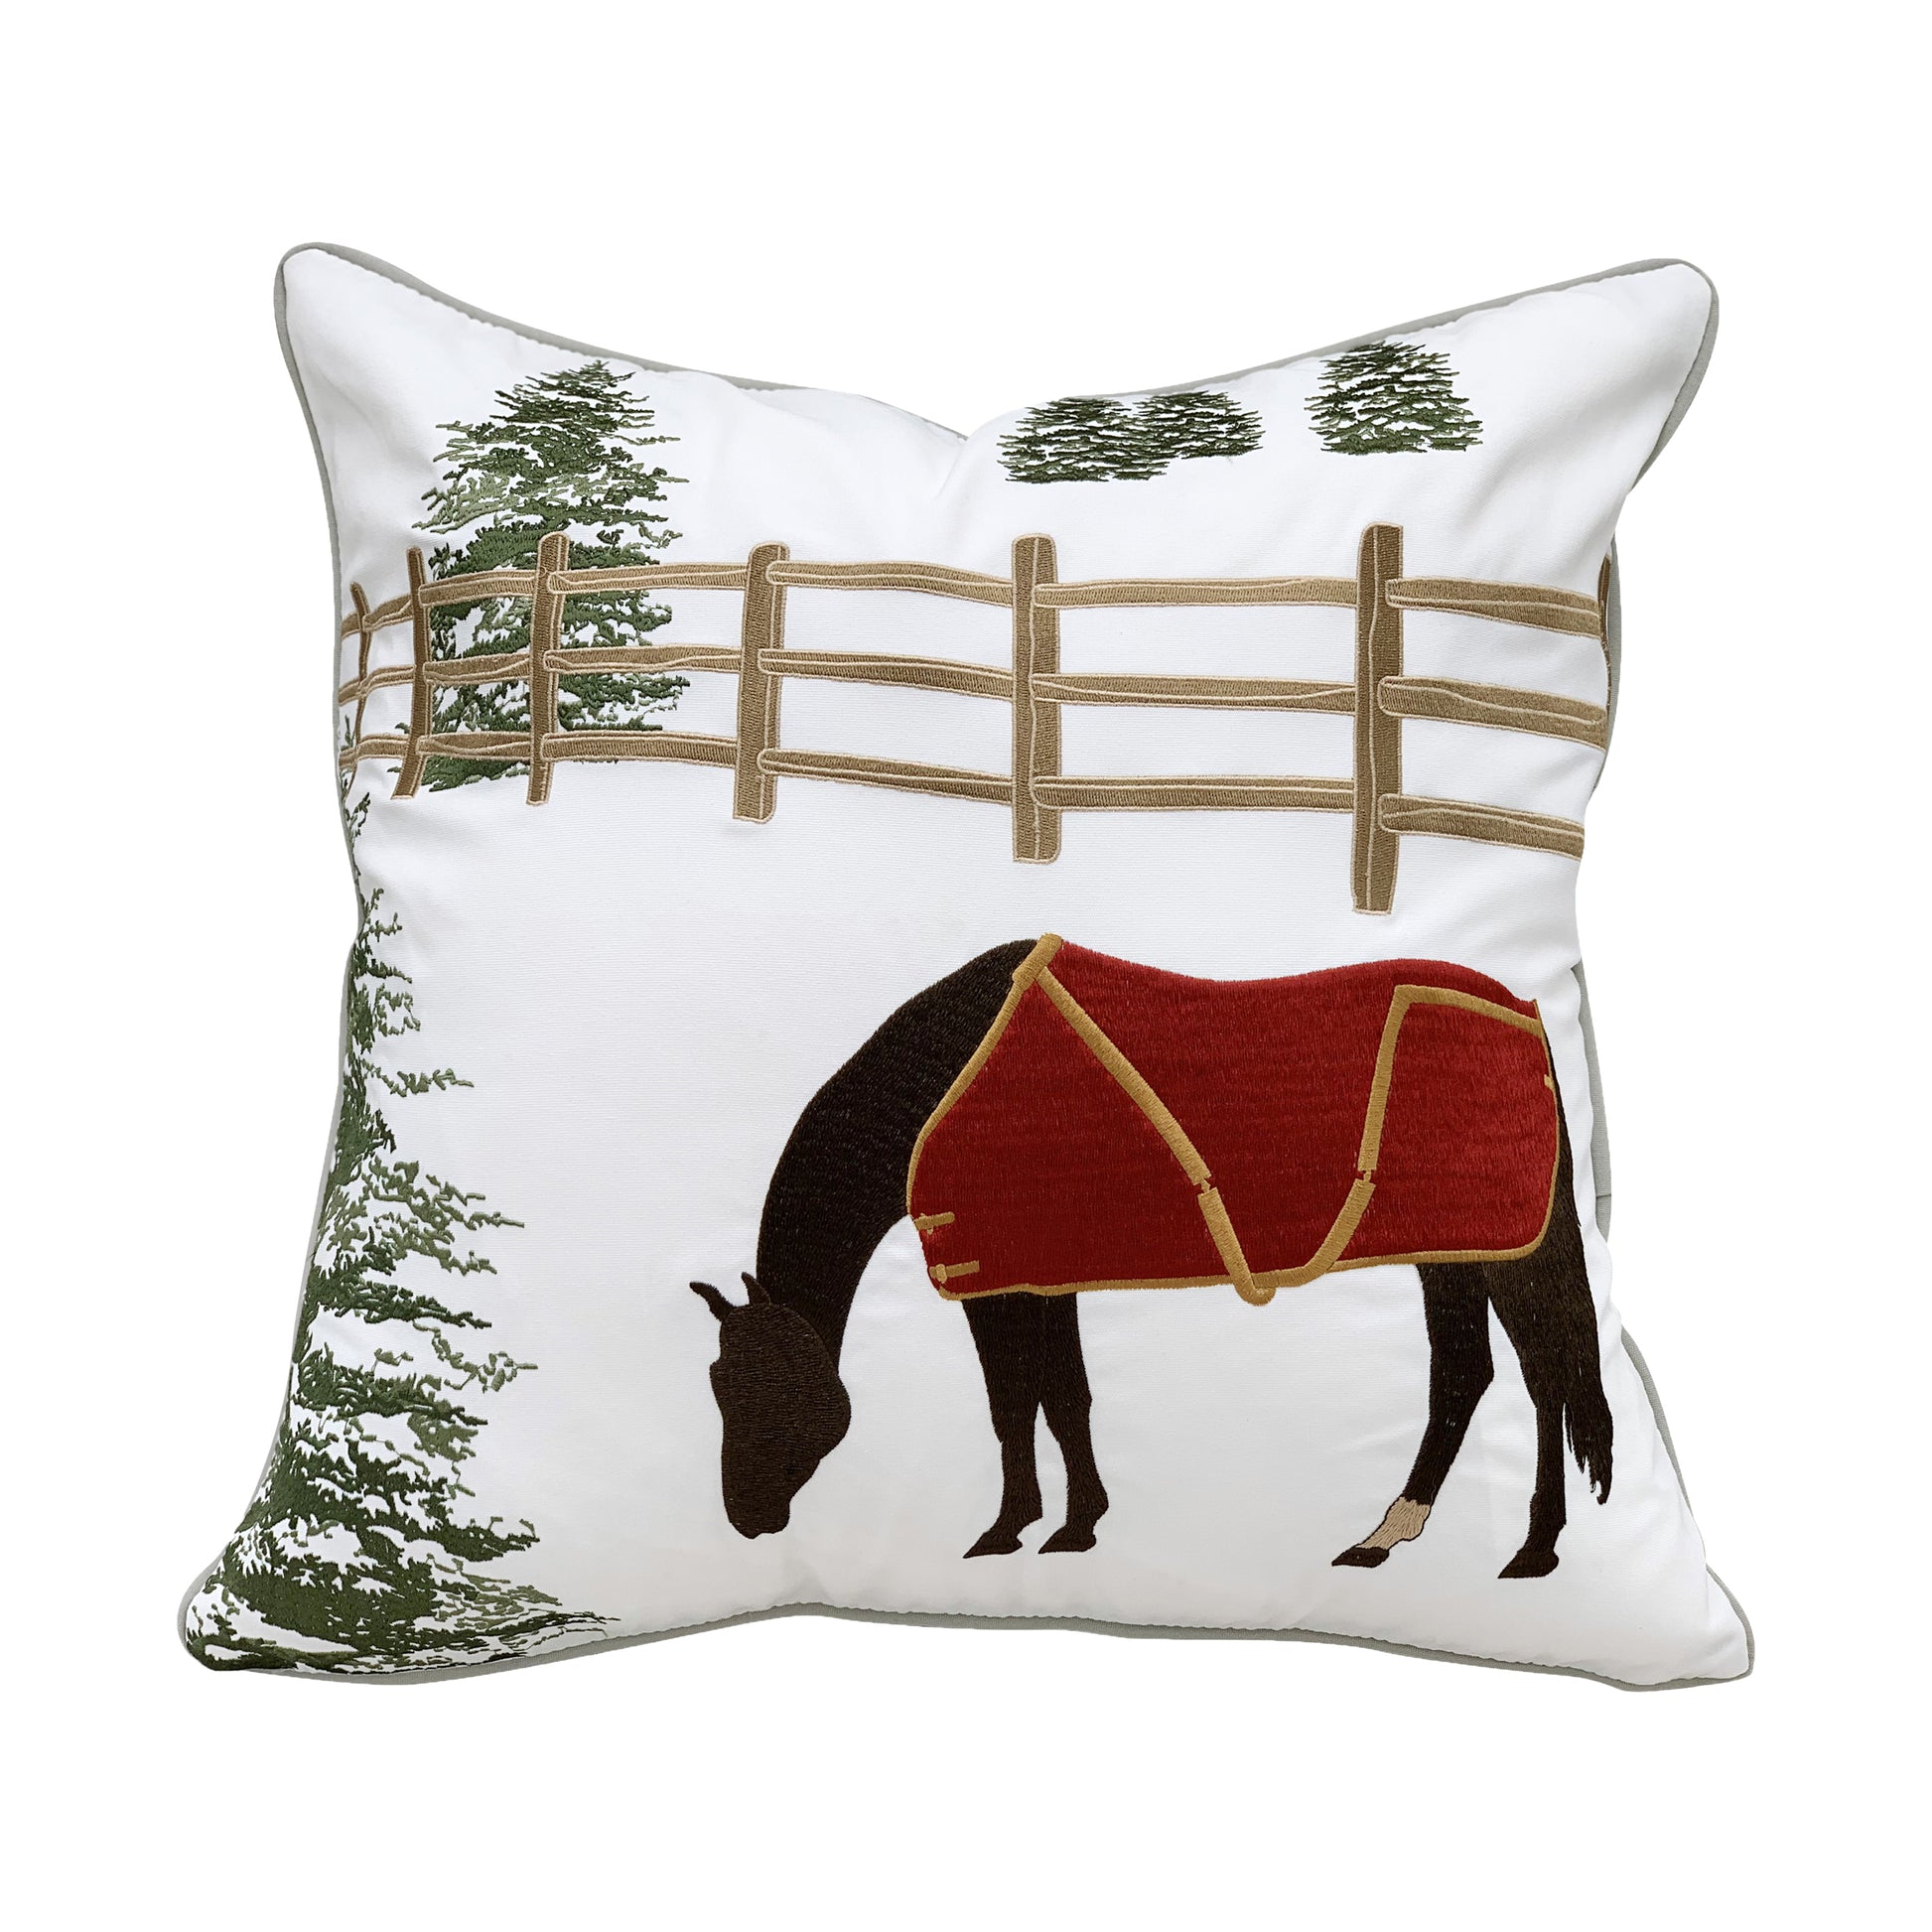 A horse grazing in a winter scene of pine trees and fencing embroidered on a white background.